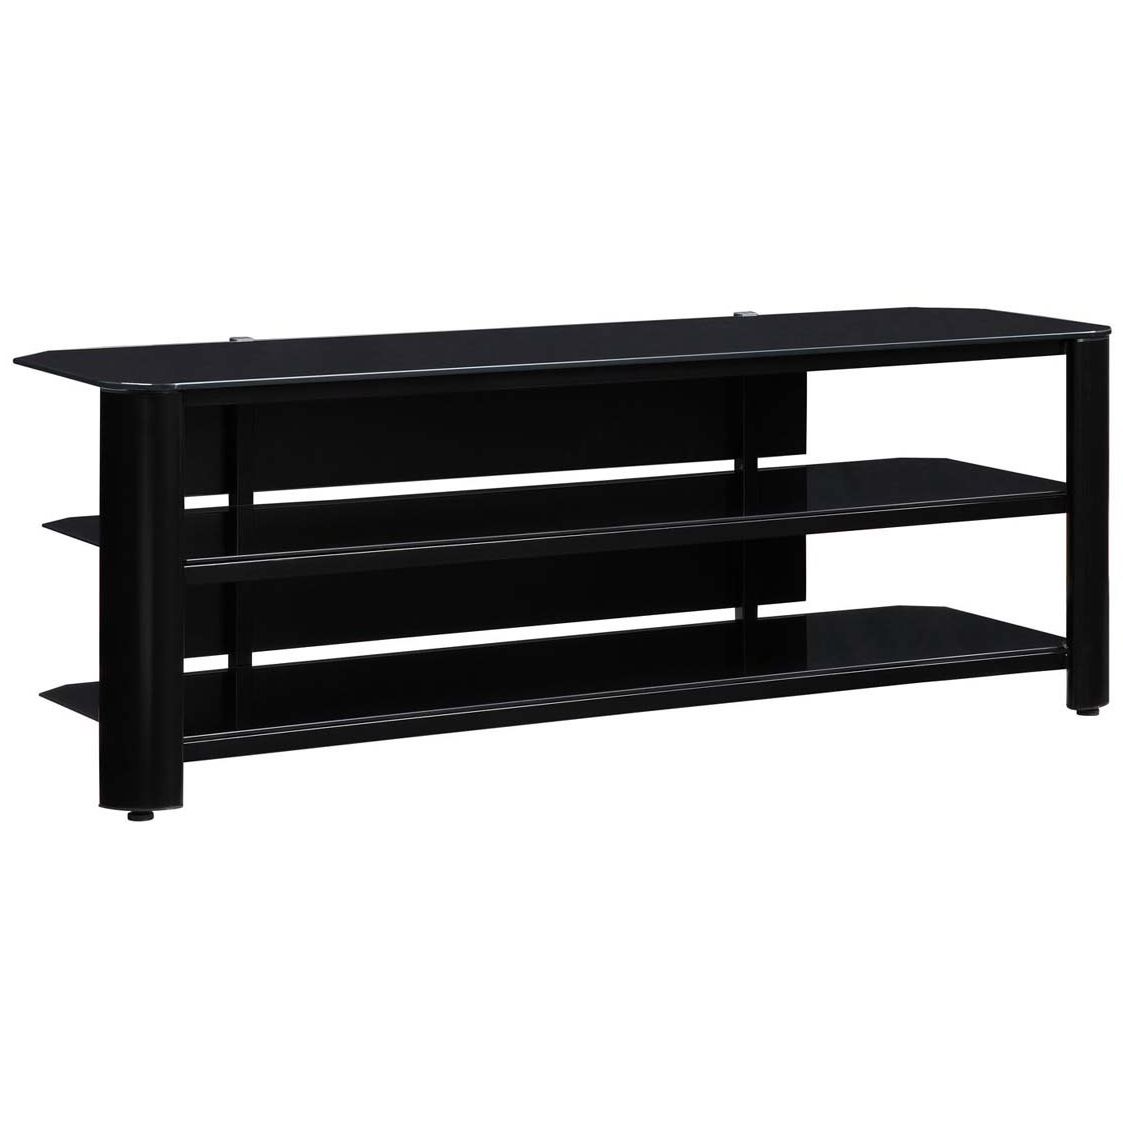 Shop Fold 'n' Snap Oxford Ez Black Innovex Tv Stand – Free Shipping Within Most Current Oxford 84 Inch Tv Stands (Photo 5 of 20)